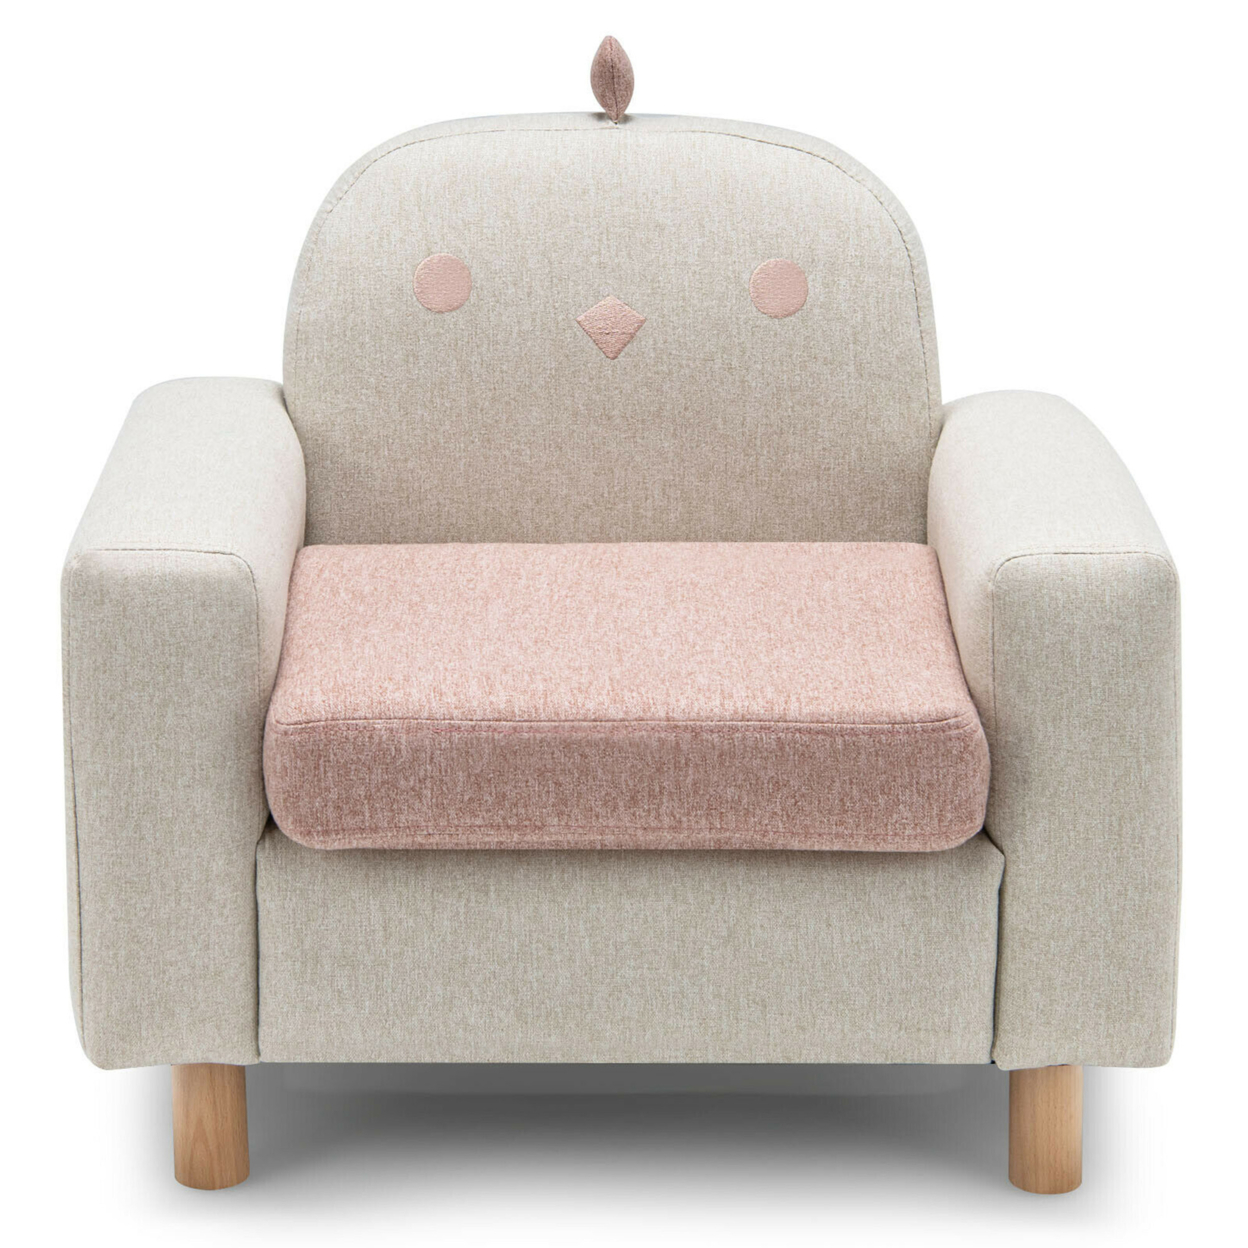 Kids Dinosaur/Panda/Chick Sofa Wooden Armrest Chair Couch W/ Thick Cushion Beech Legs Gift - Pink, Chick